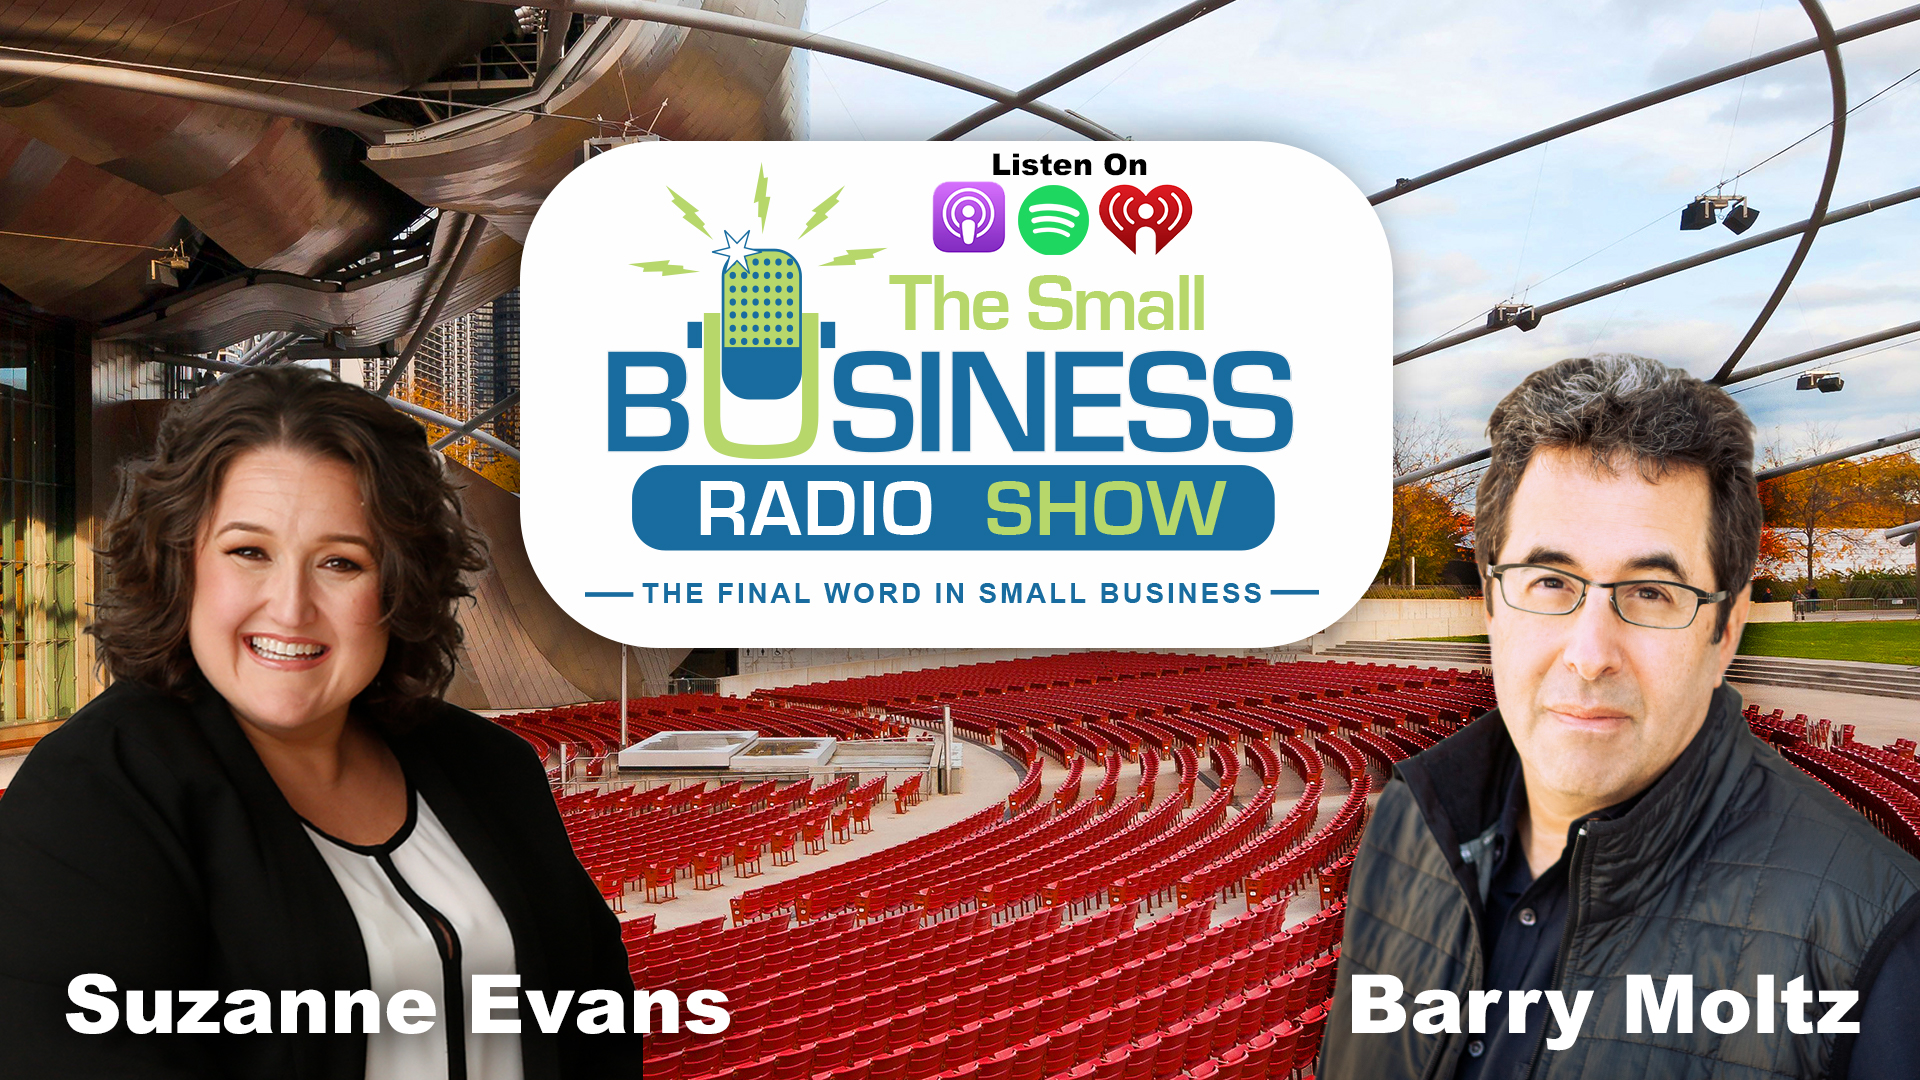 Suzanne Evans on The Small Business Radio Show